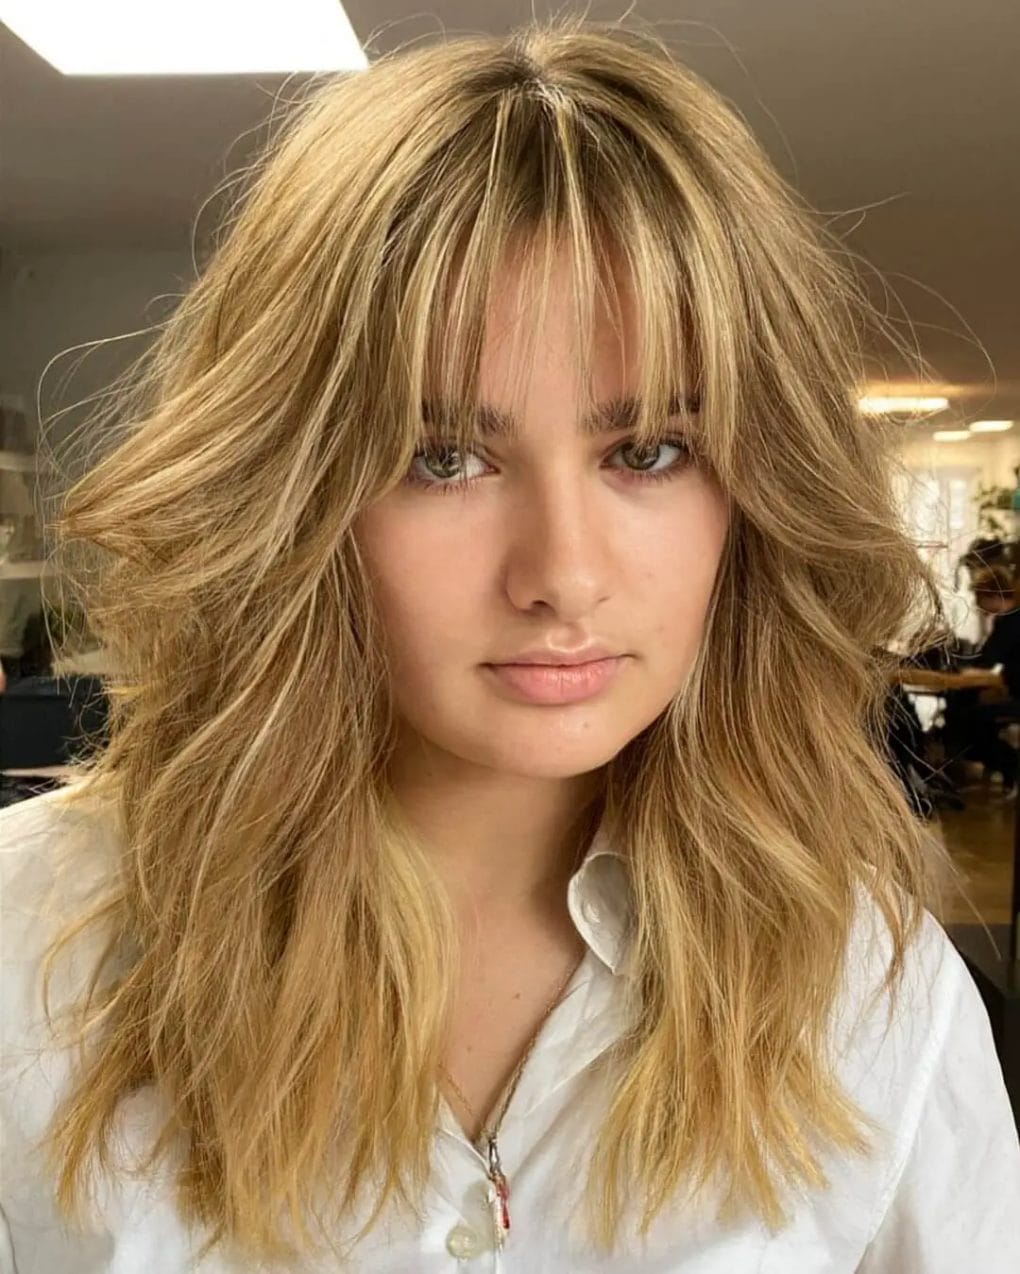 Tousled shaggy layers with soft Bardot bangs in a mix of blonde hues, perfect for a bohemian-inspired carefree look.